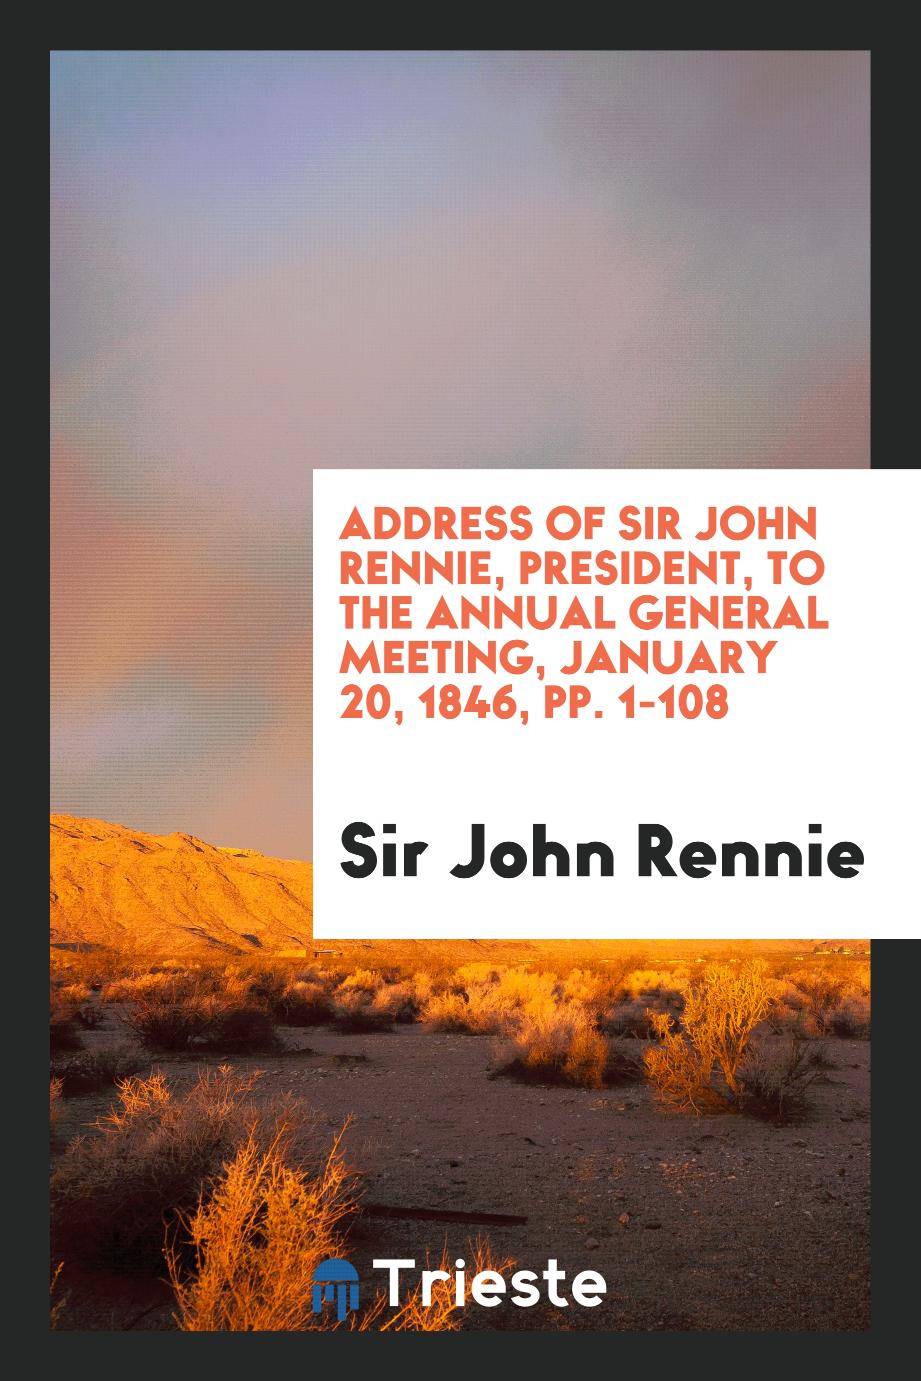 Address of Sir John Rennie, President, to the Annual General Meeting, January 20, 1846, pp. 1-108